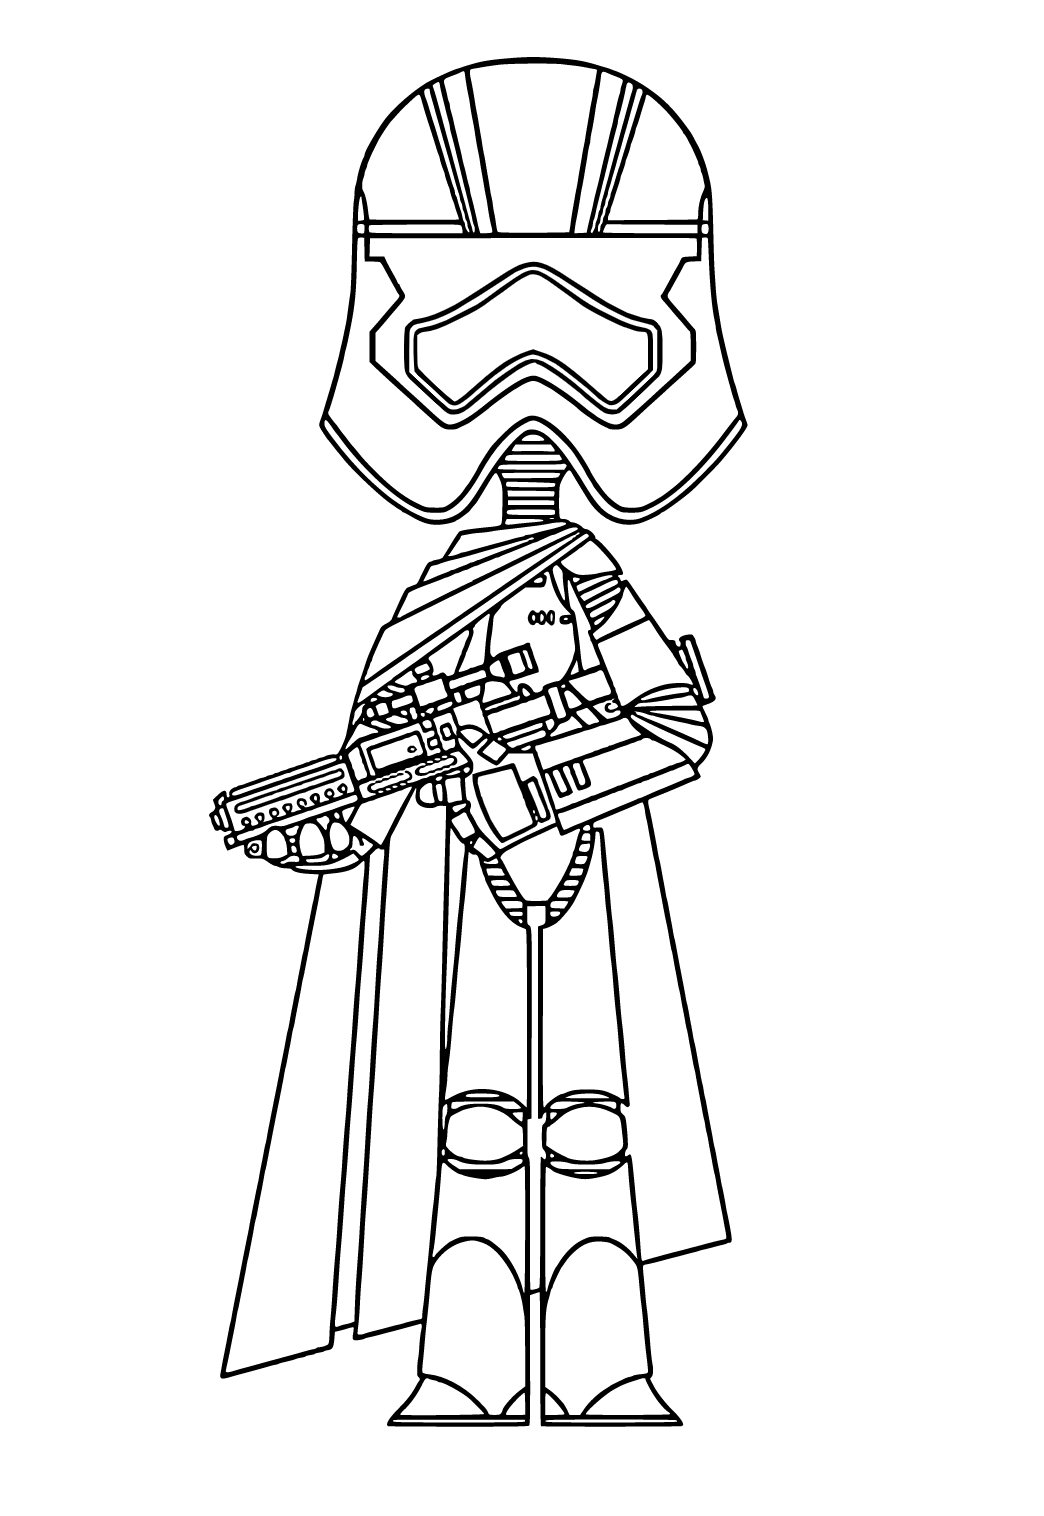 Free printable star wars mask coloring page for adults and kids